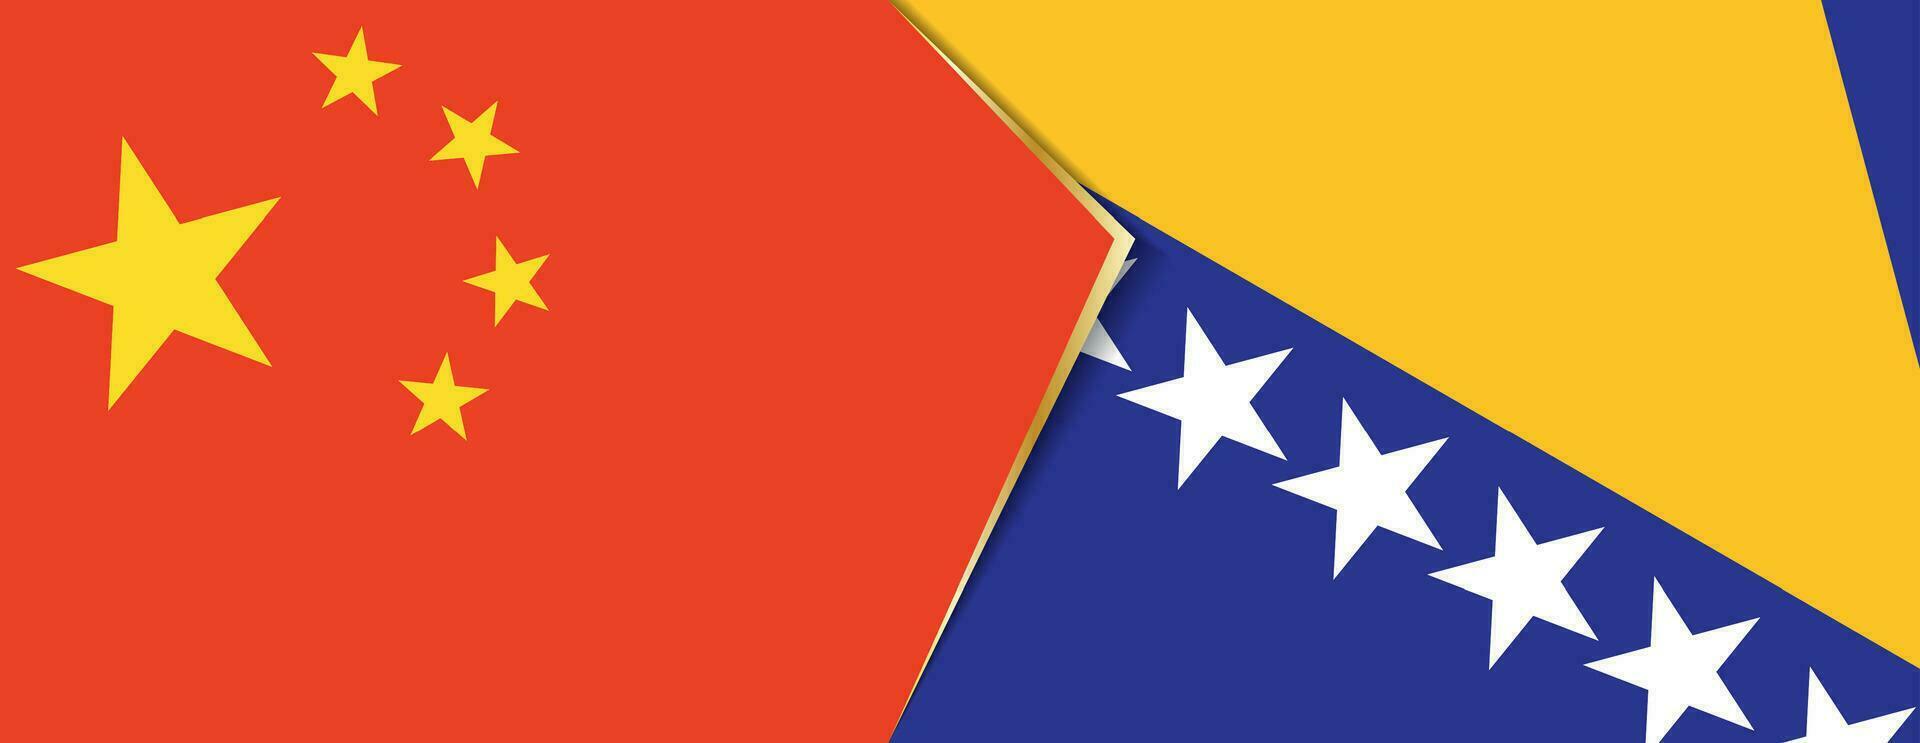 China and Bosnia and Herzegovina flags, two vector flags.